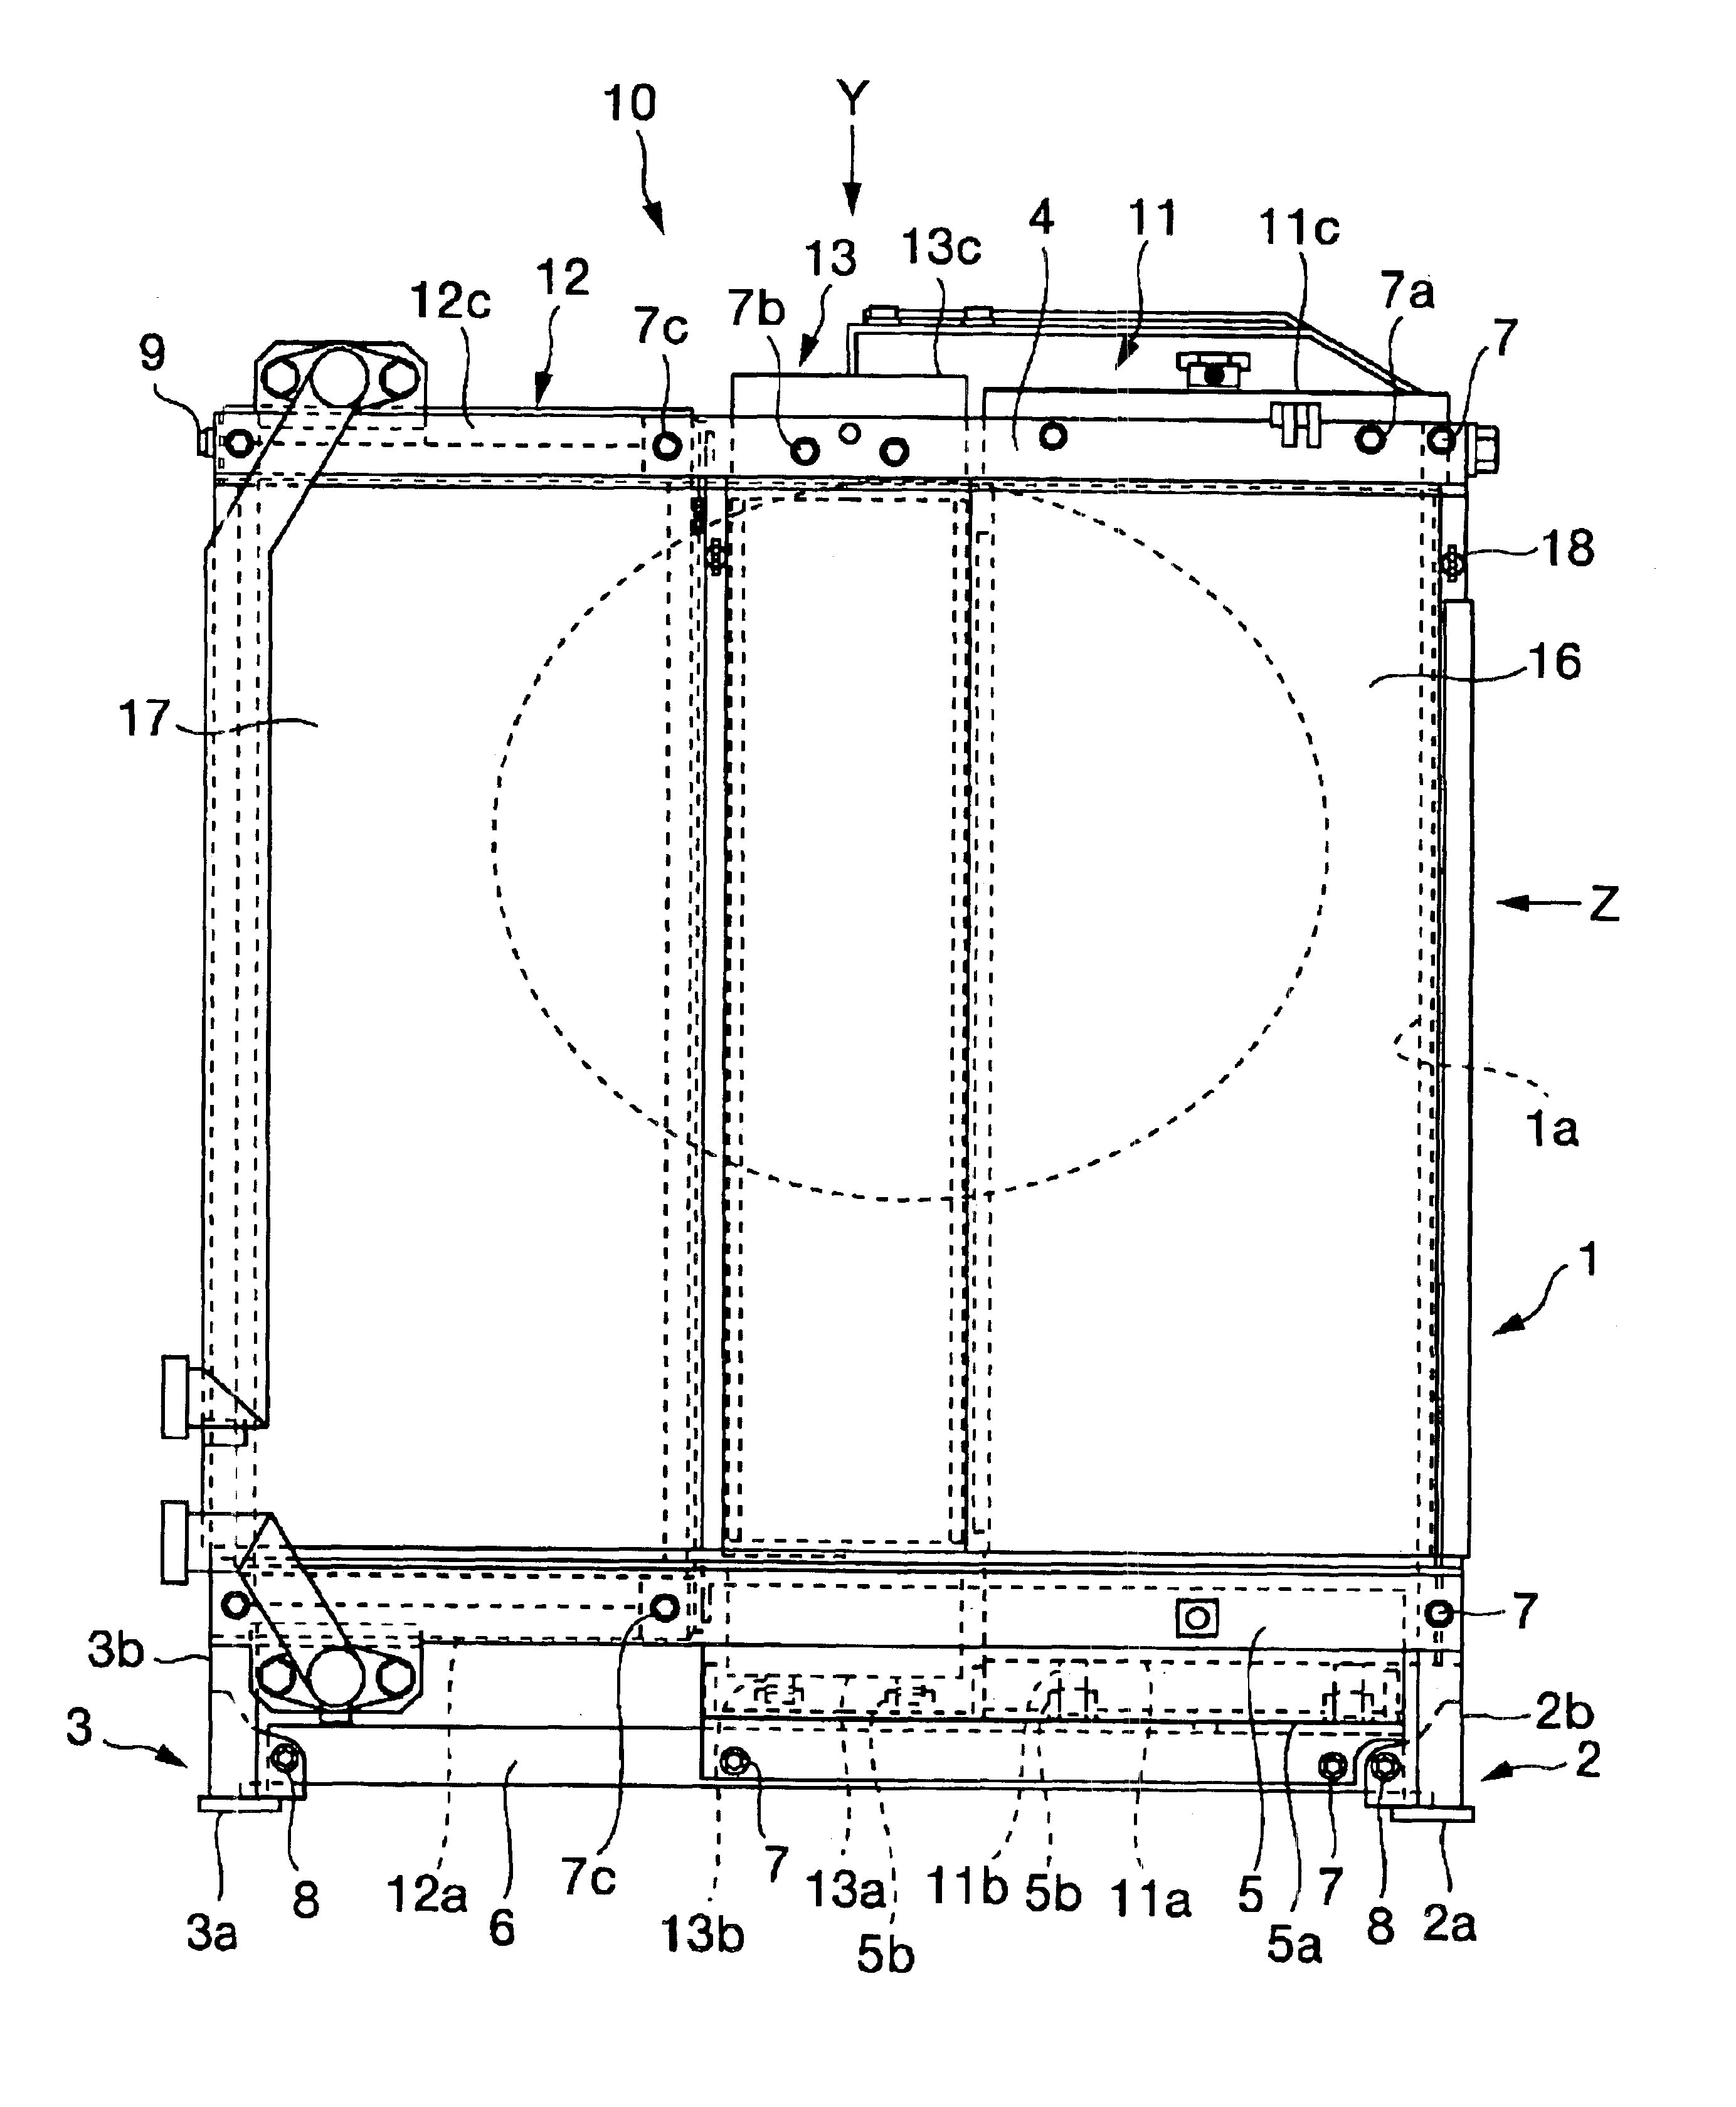 Cooling apparatus for a work machine